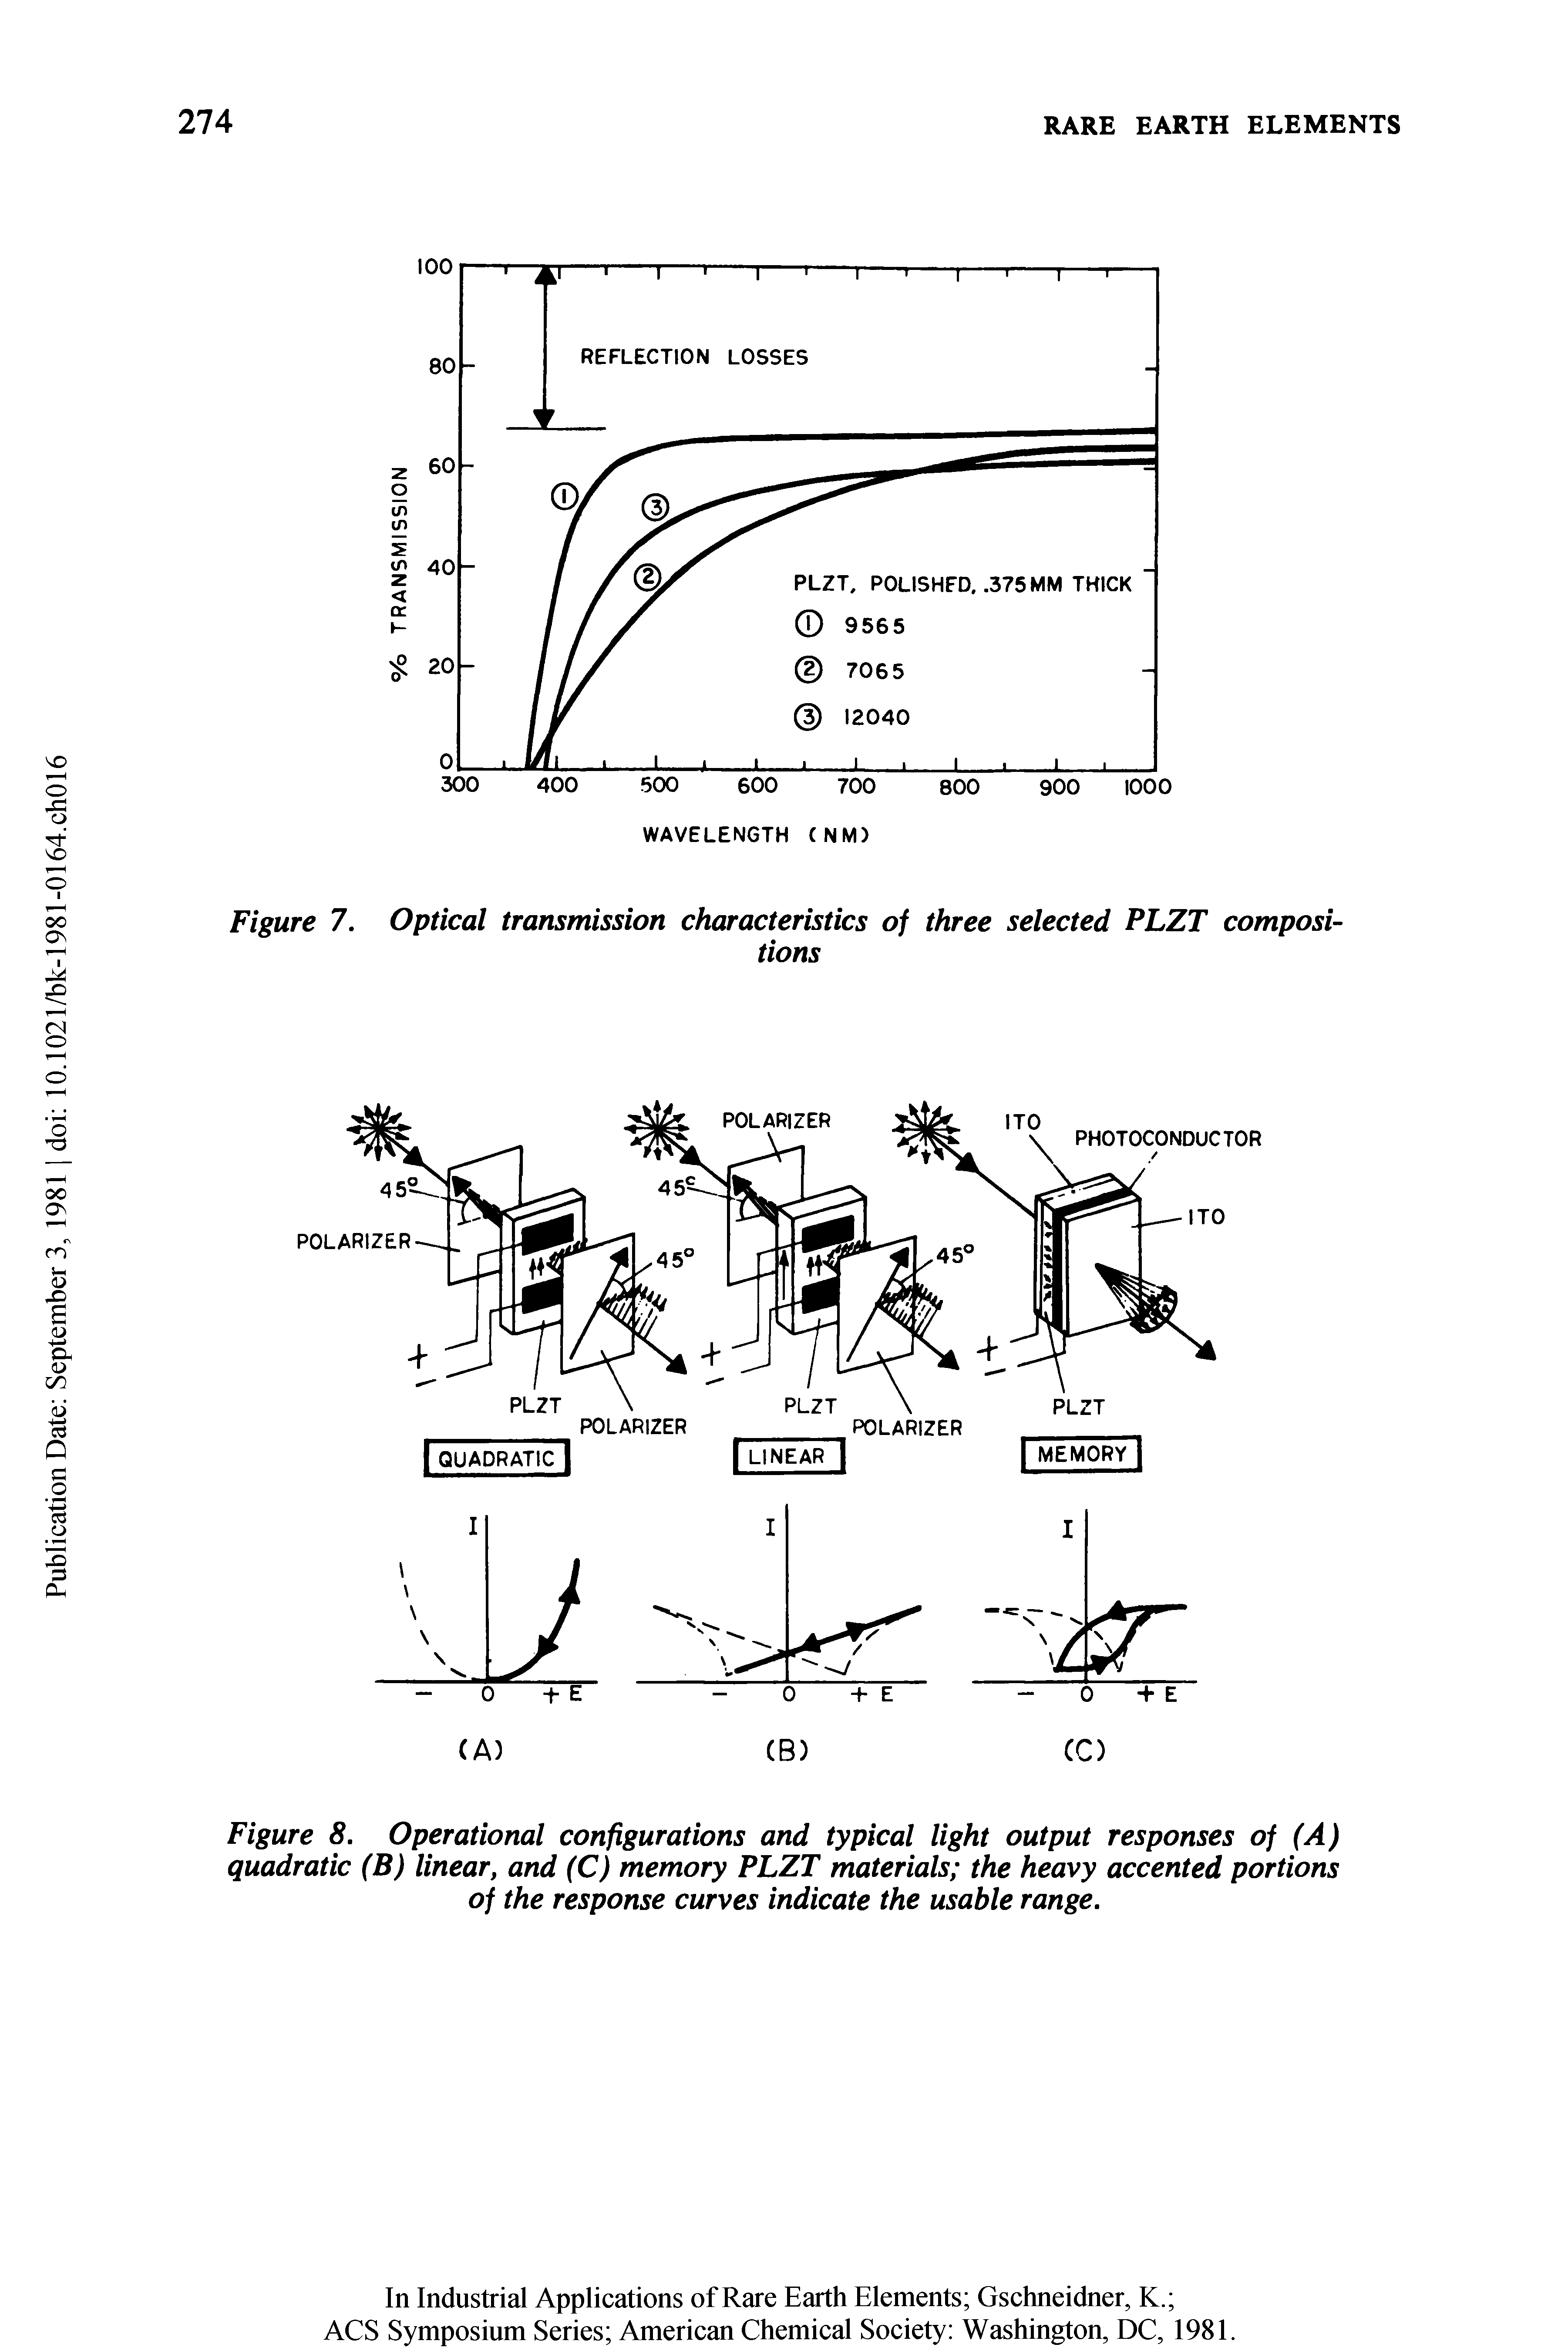 Figure 8. Operational configurations and typical light output responses of (A) quadratic (B) linear, and (C) memory PLZT materials the heavy accented portions of the response curves indicate the usable range.